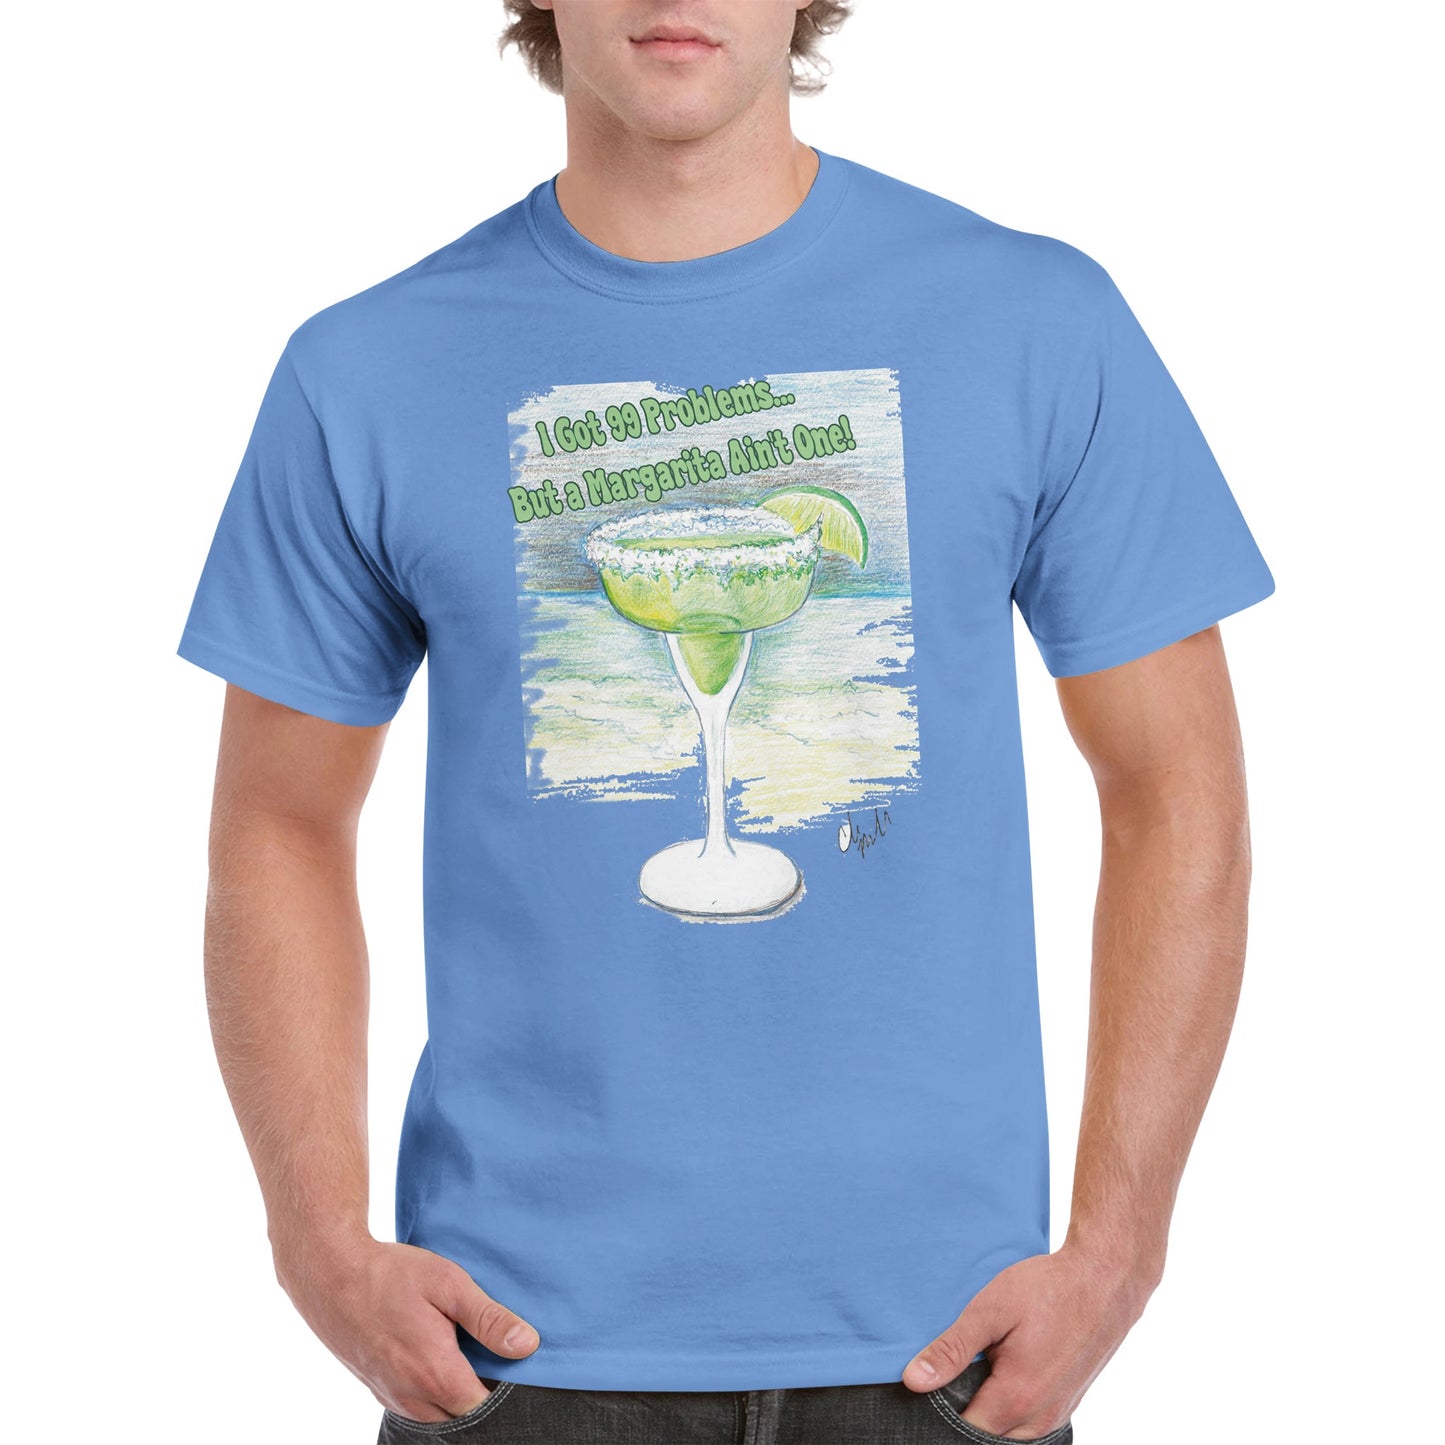 A Carolina Blue heavyweight Unisex Crewneck cotton t-shirt with original artwork I Got 99 Problems… But A Margarita Ain’t One! on the front from WhatYa Say Apparel worn by blonde-haired male front view.